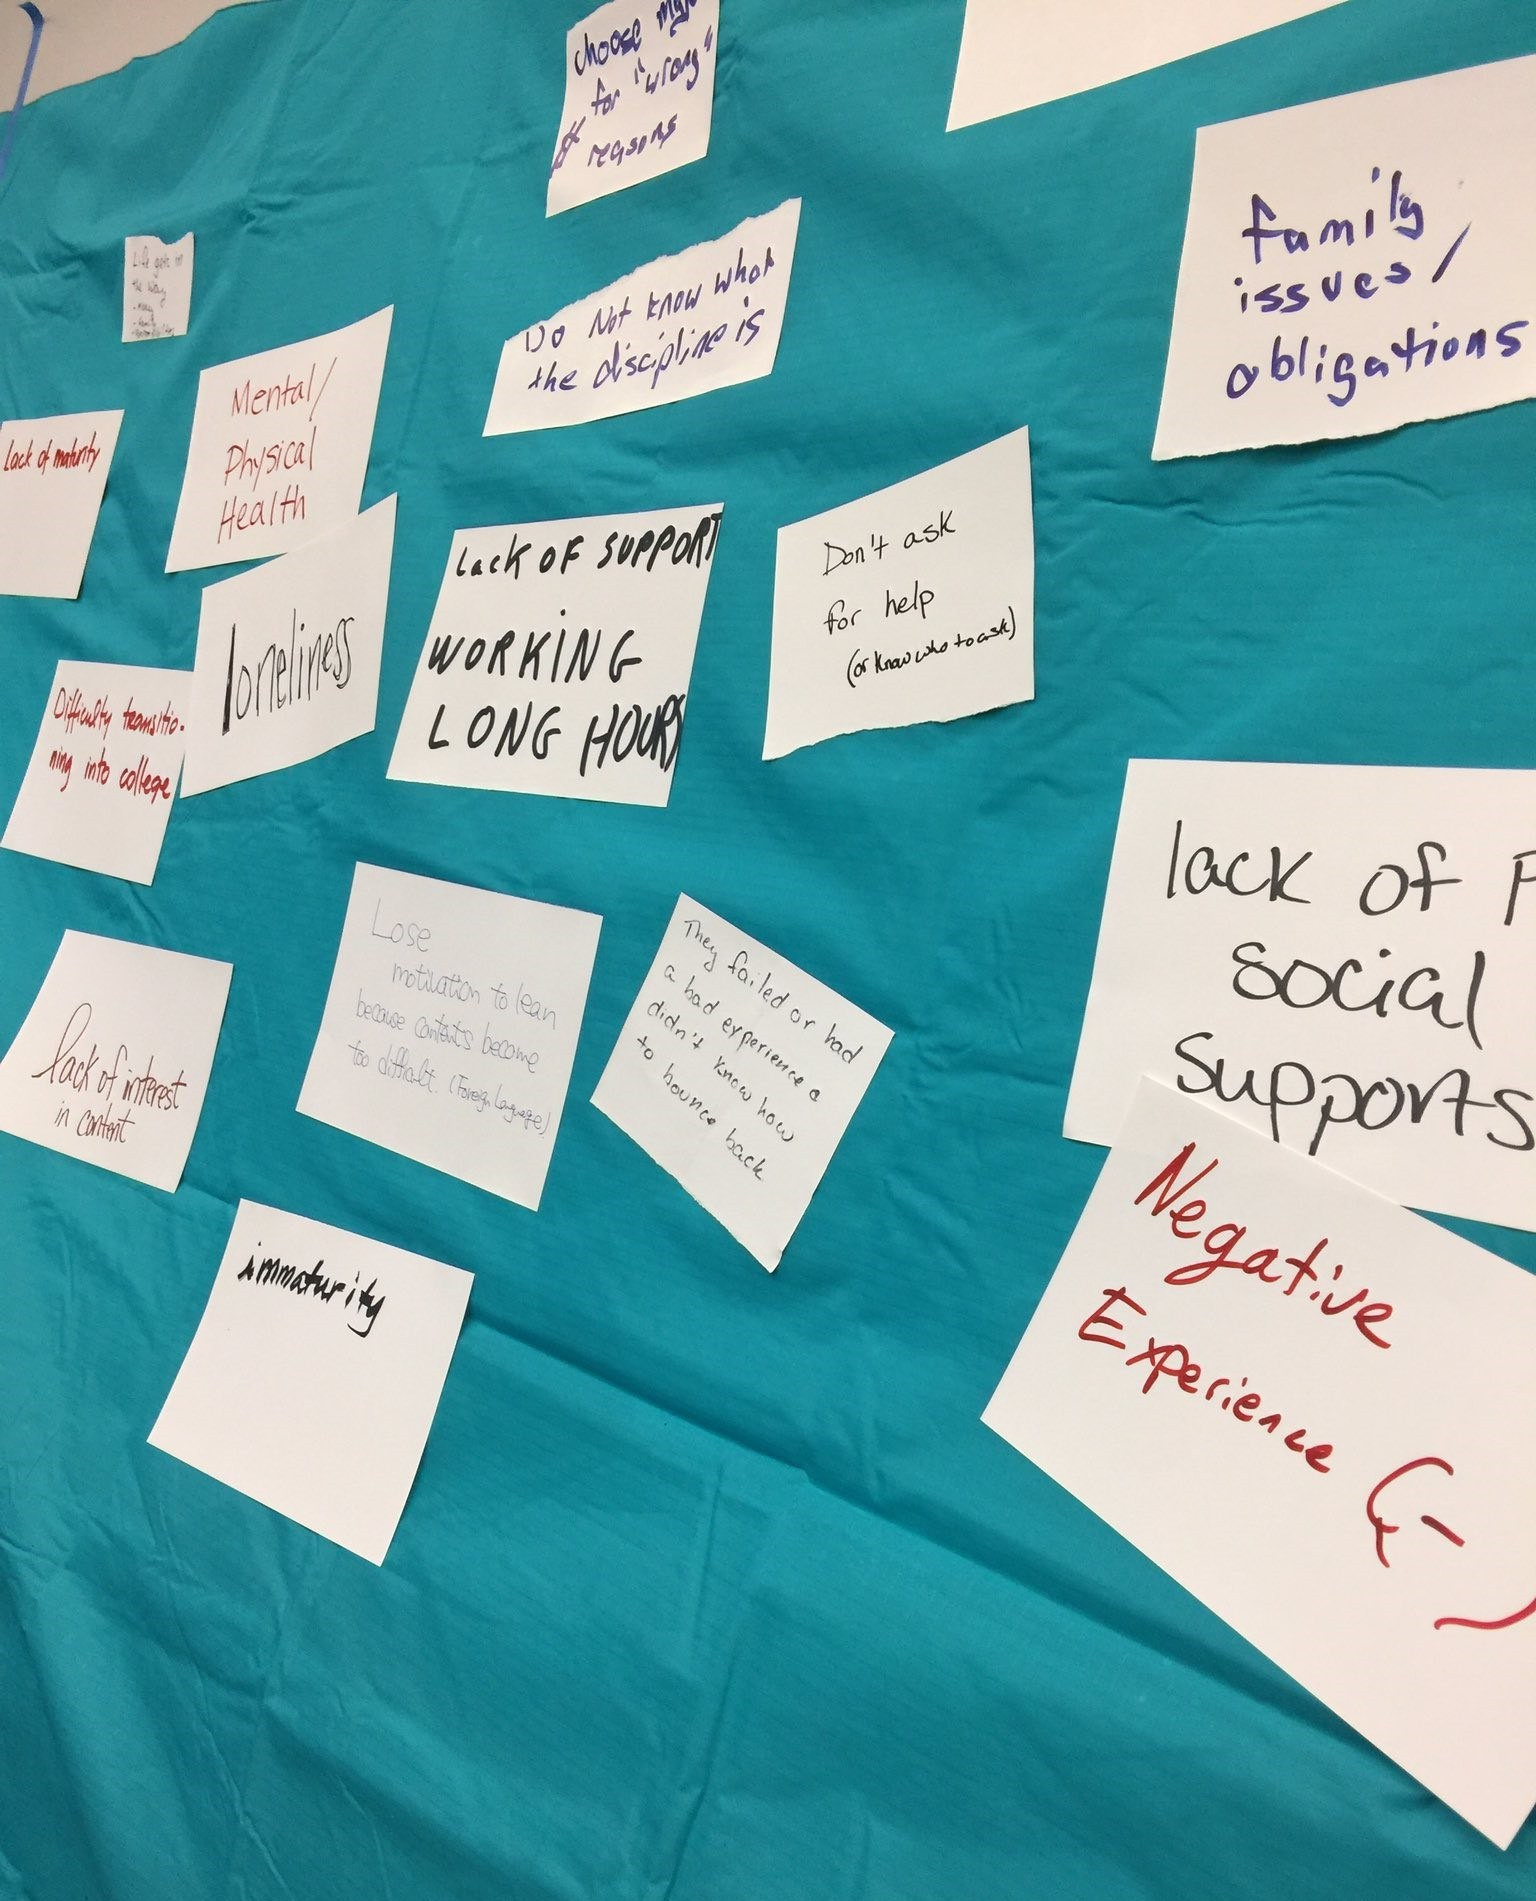 board with stick notes listing reasons students don't persist, such as family issues, lack of social support, negative experiences, lack of support, working long hours, don't ask for help